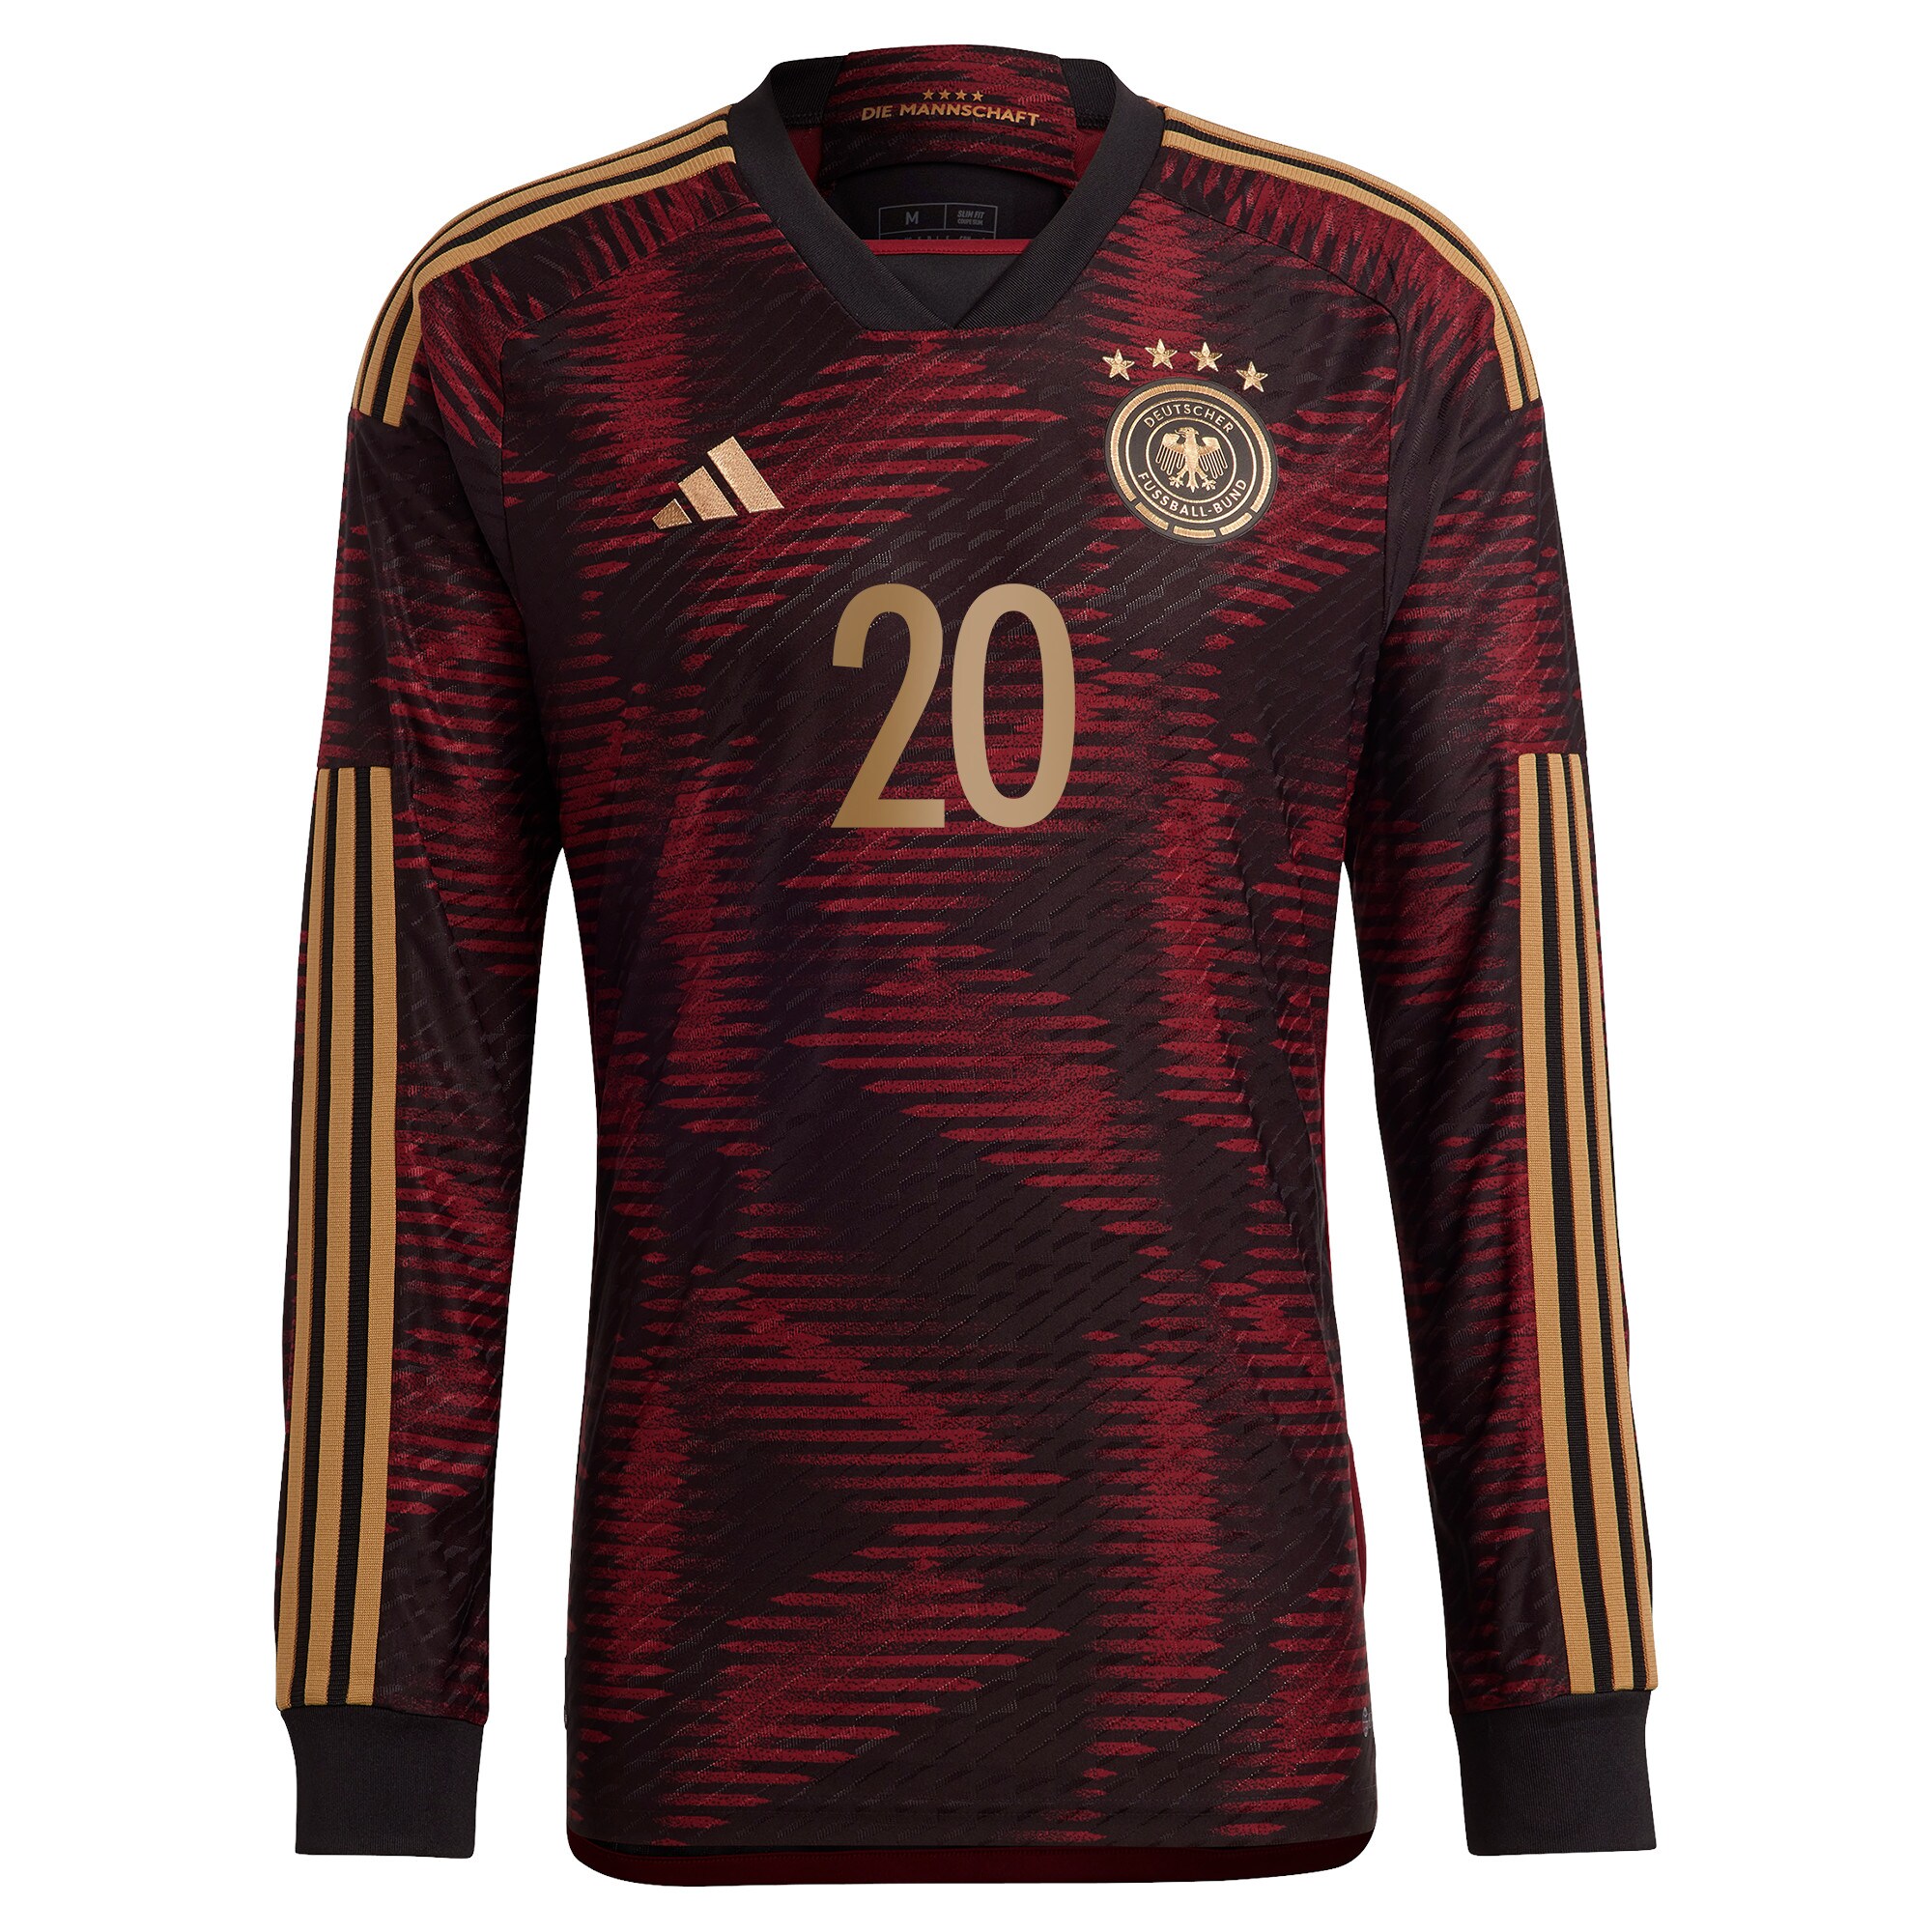 Germany Away Authentic Shirt Long Sleeve with Adeyemi 20 printing